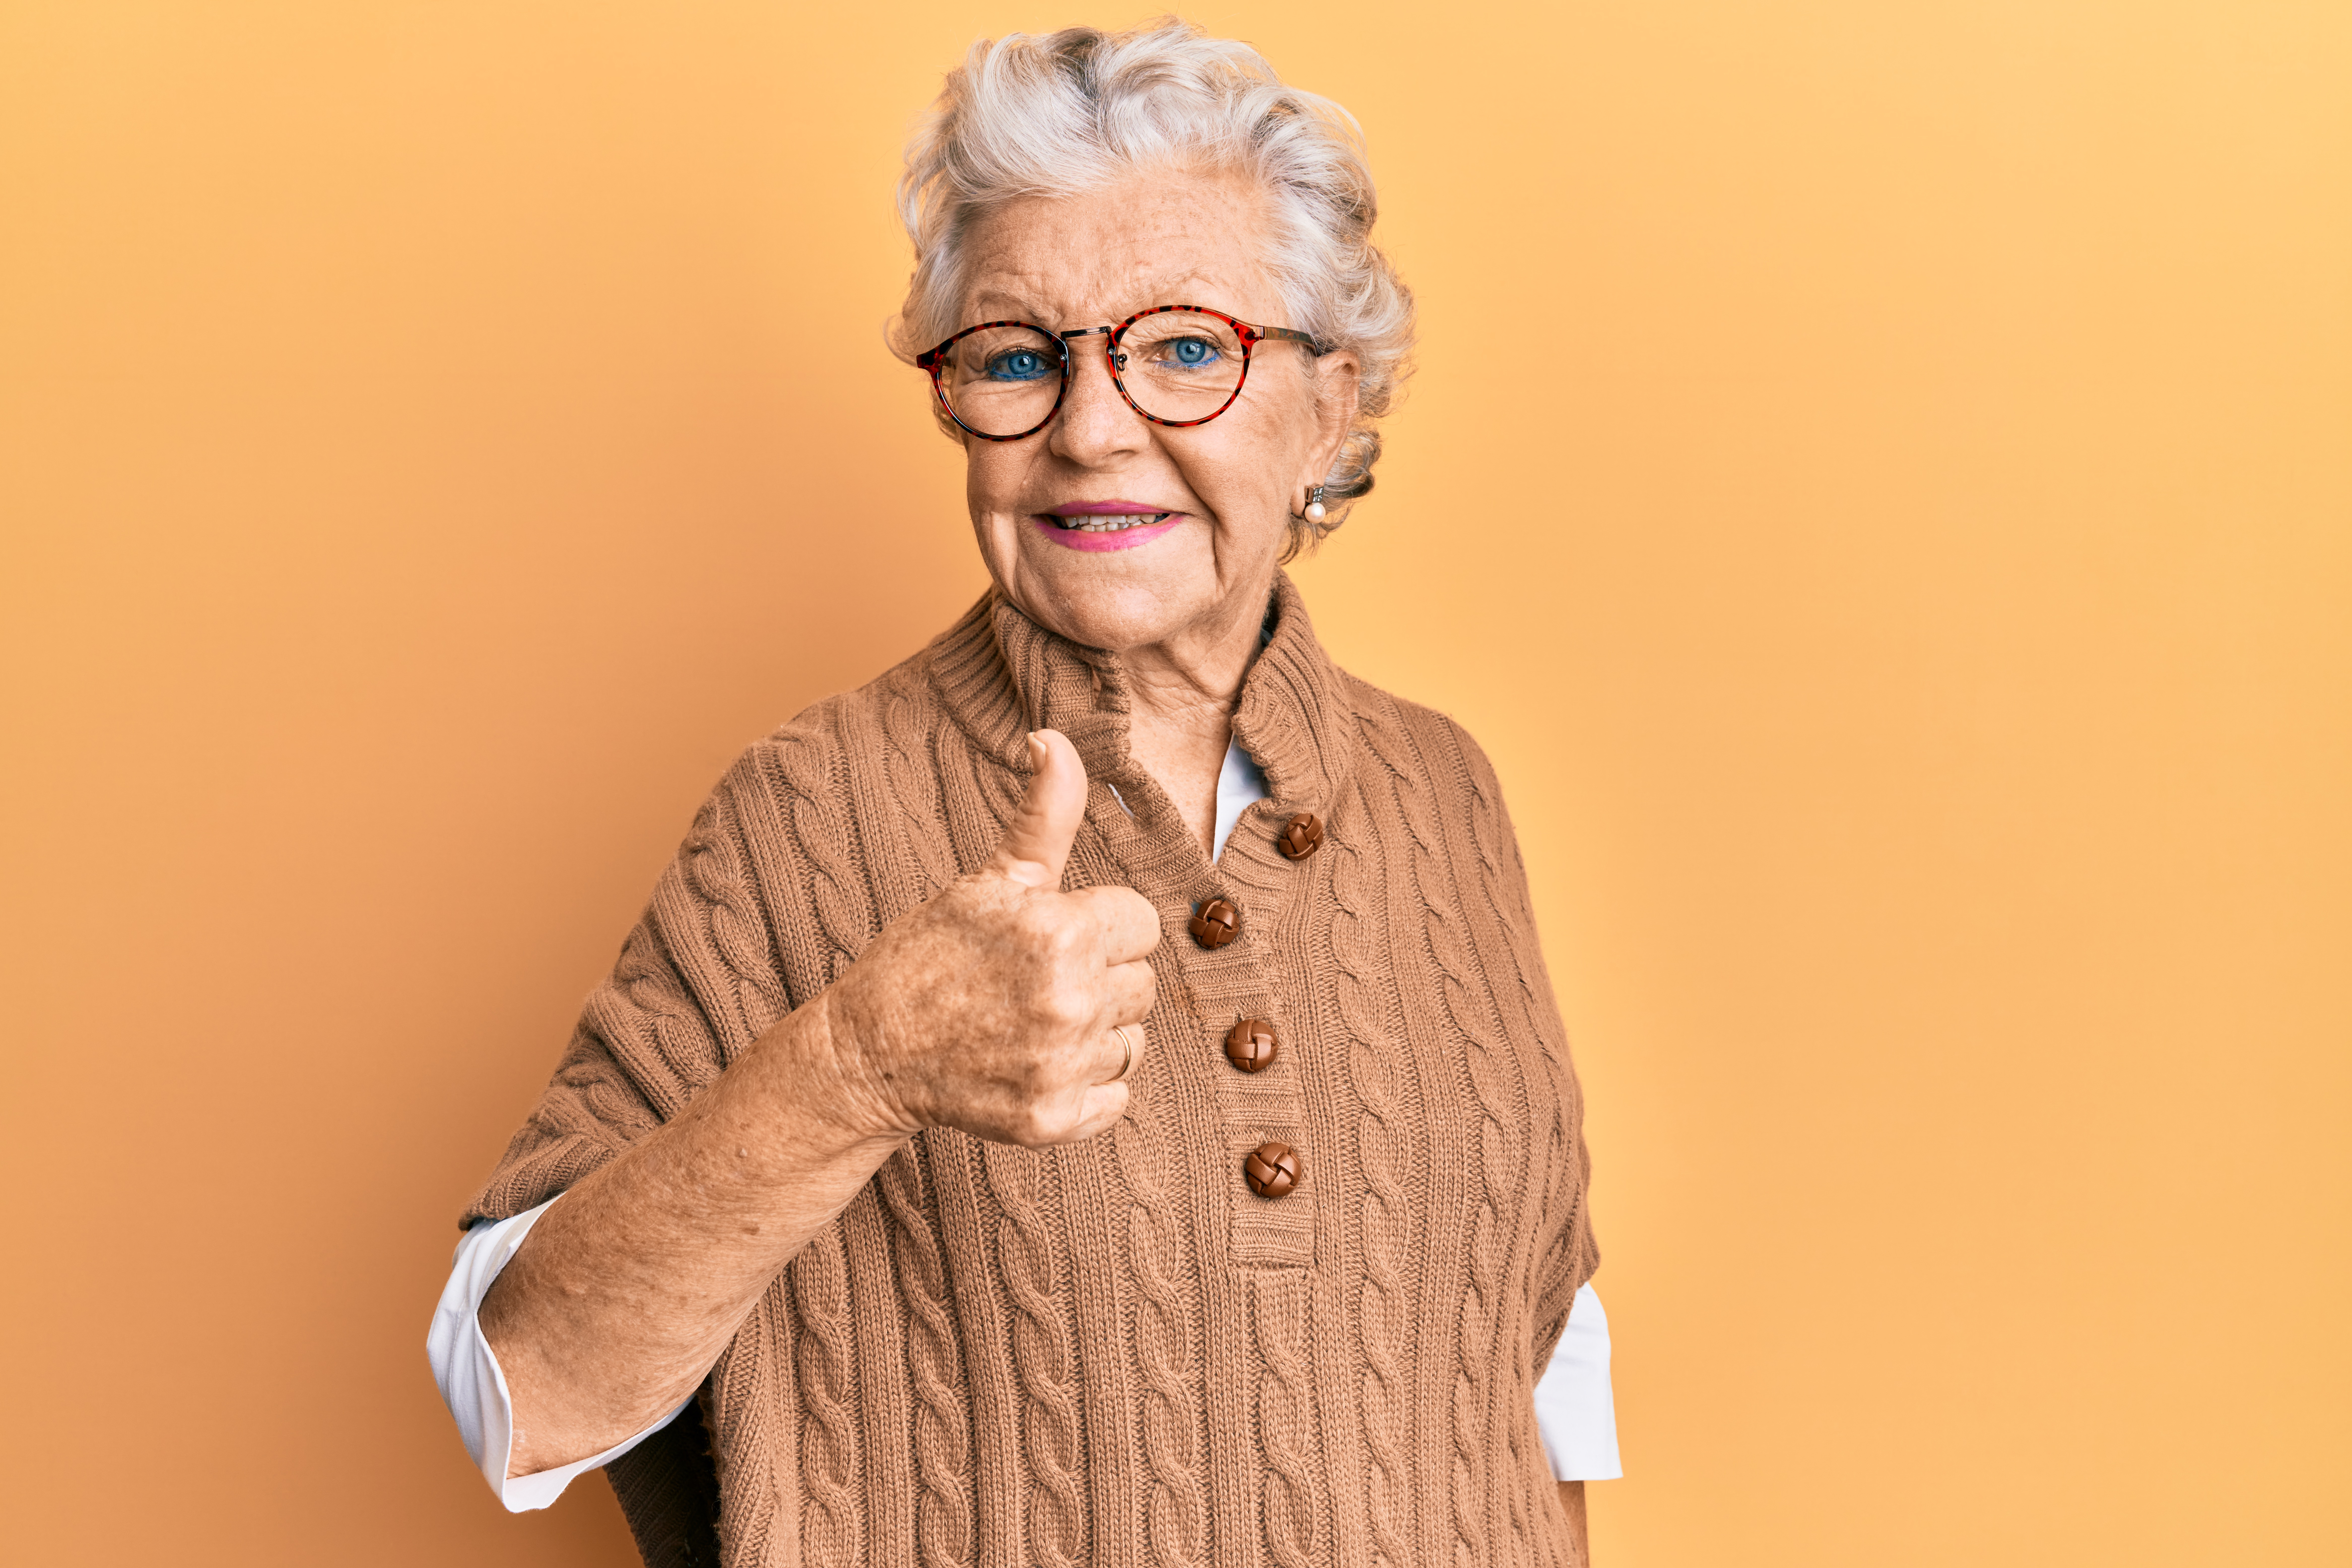 A smiling senior doing a thumbs up | Source: Shutterstock